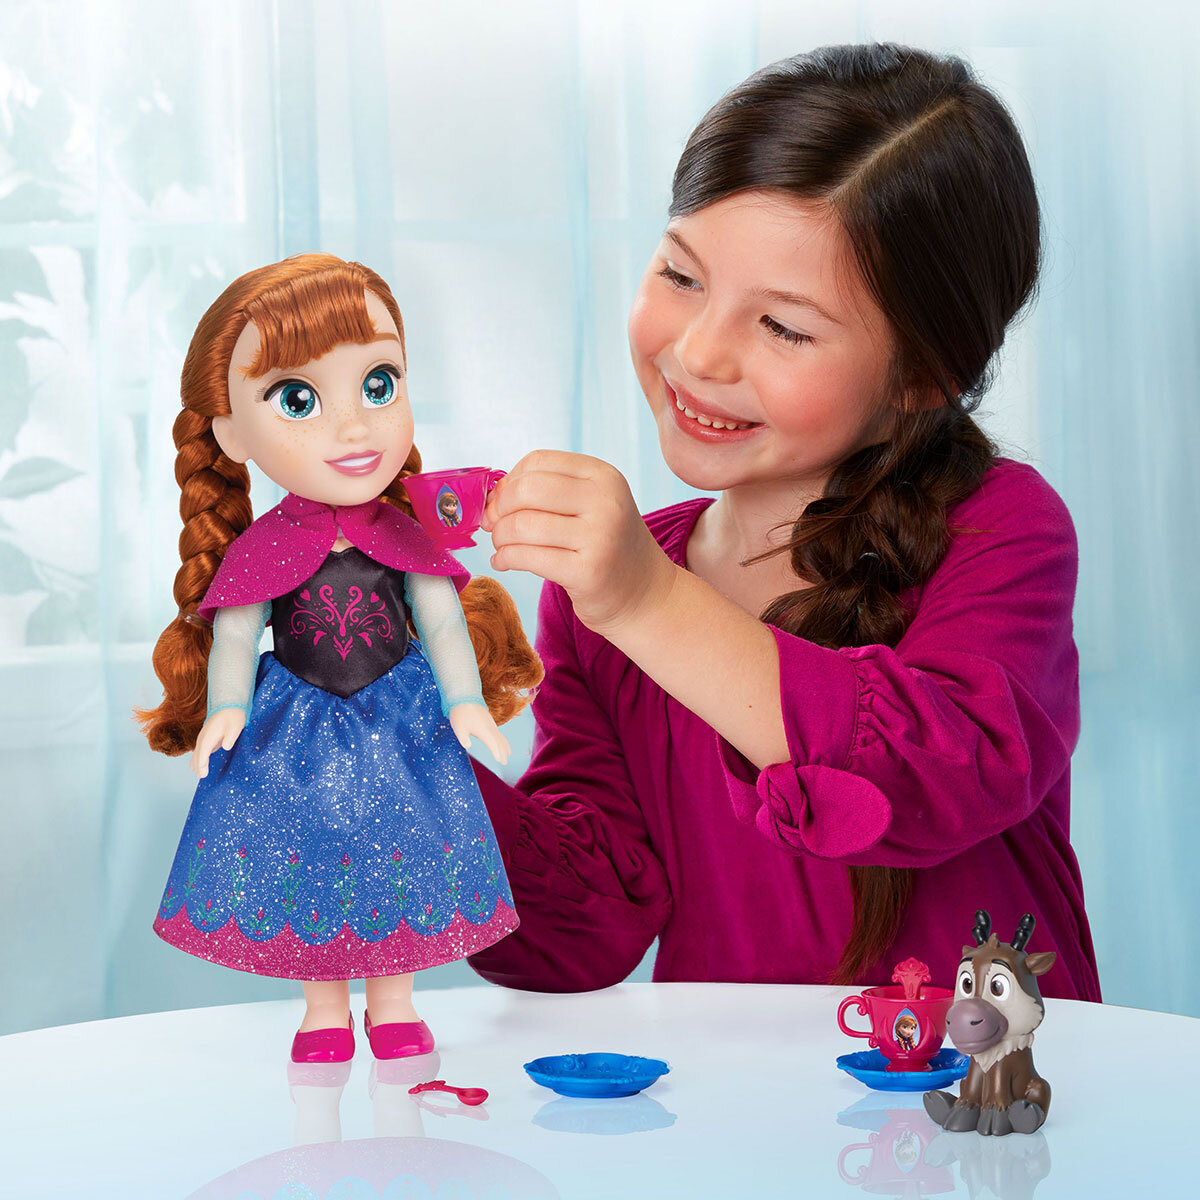 Buy Disney Tea Time Party Doll Anna & Sven Items Image at Costco.co.uk